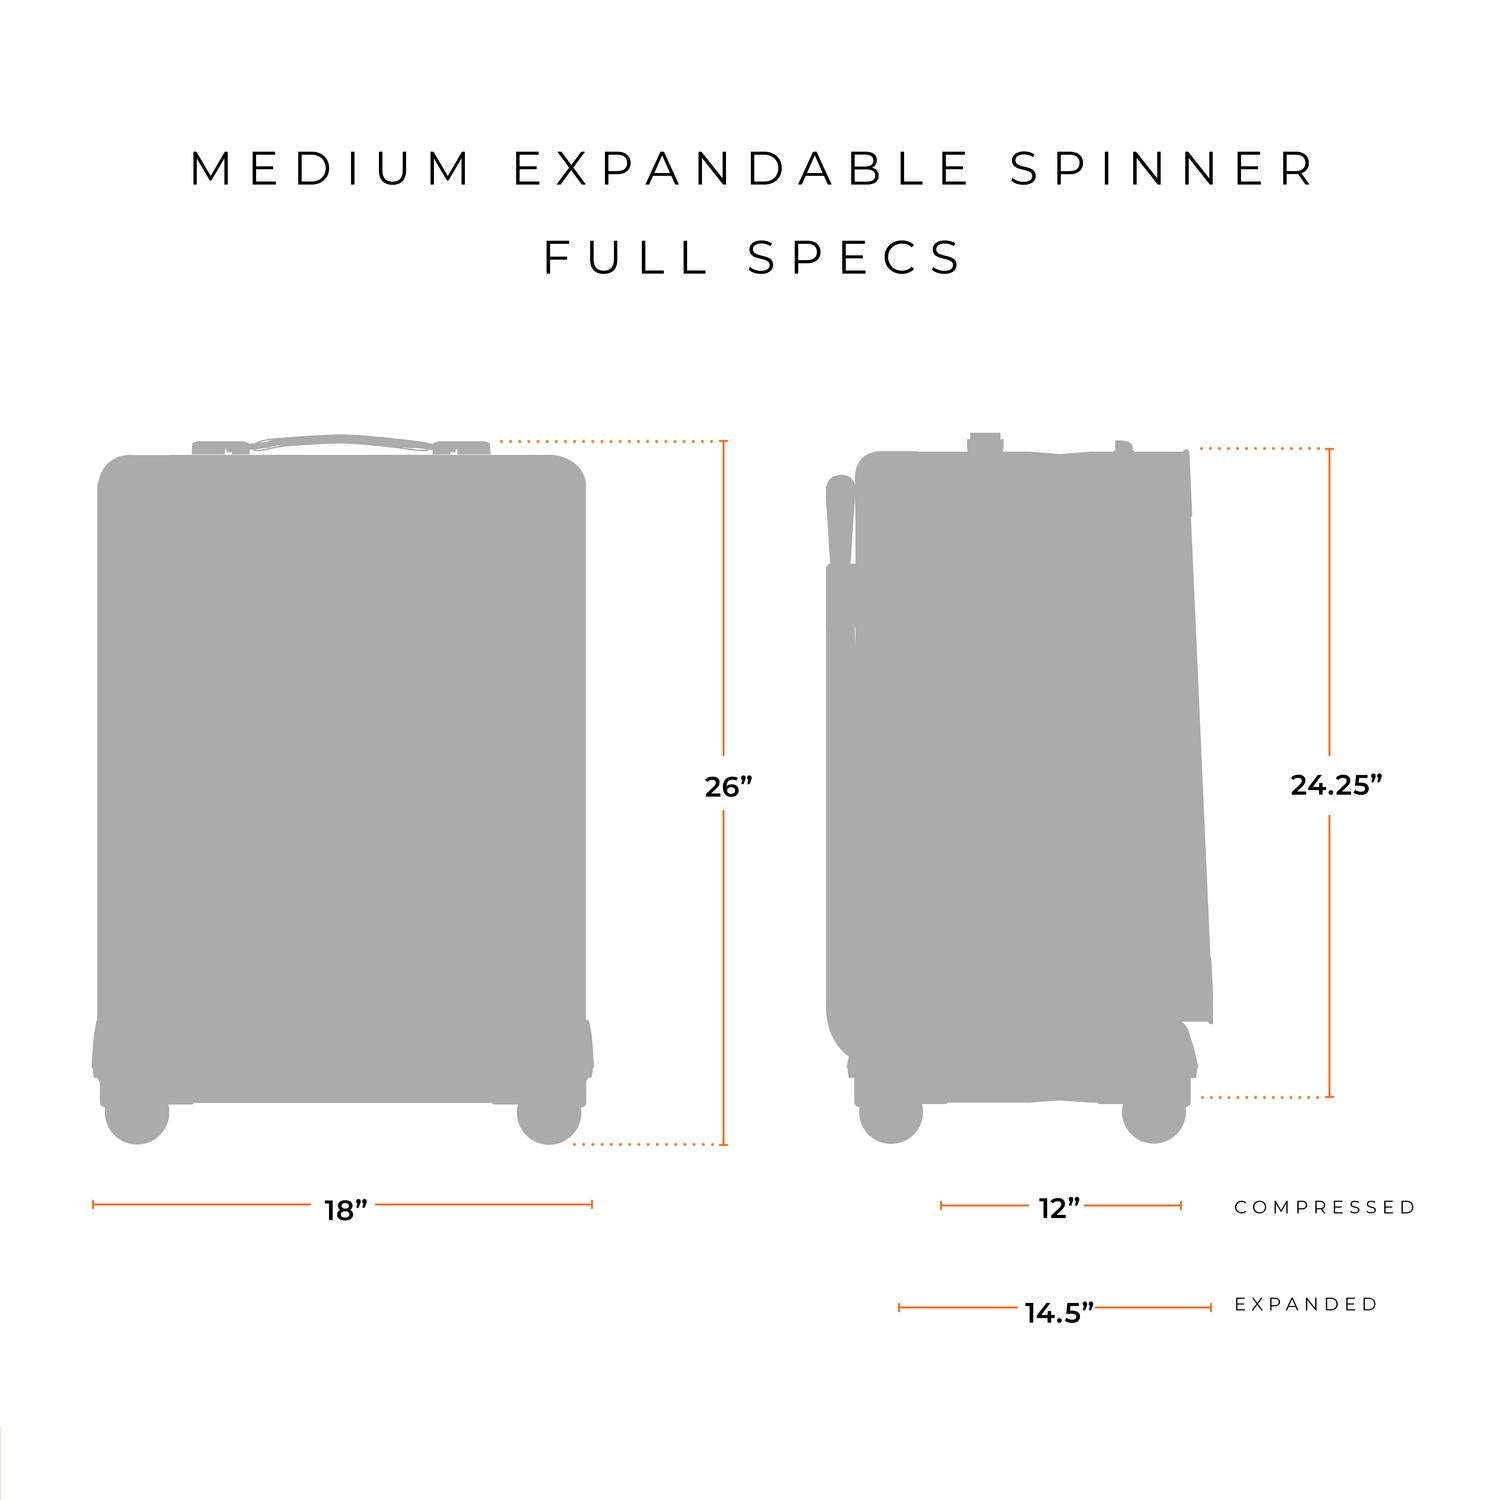 Briggs and Riley Medium Expandable Spinner Full Specs 18"x26"x12" compressed or 14.5" expanded #color_olive